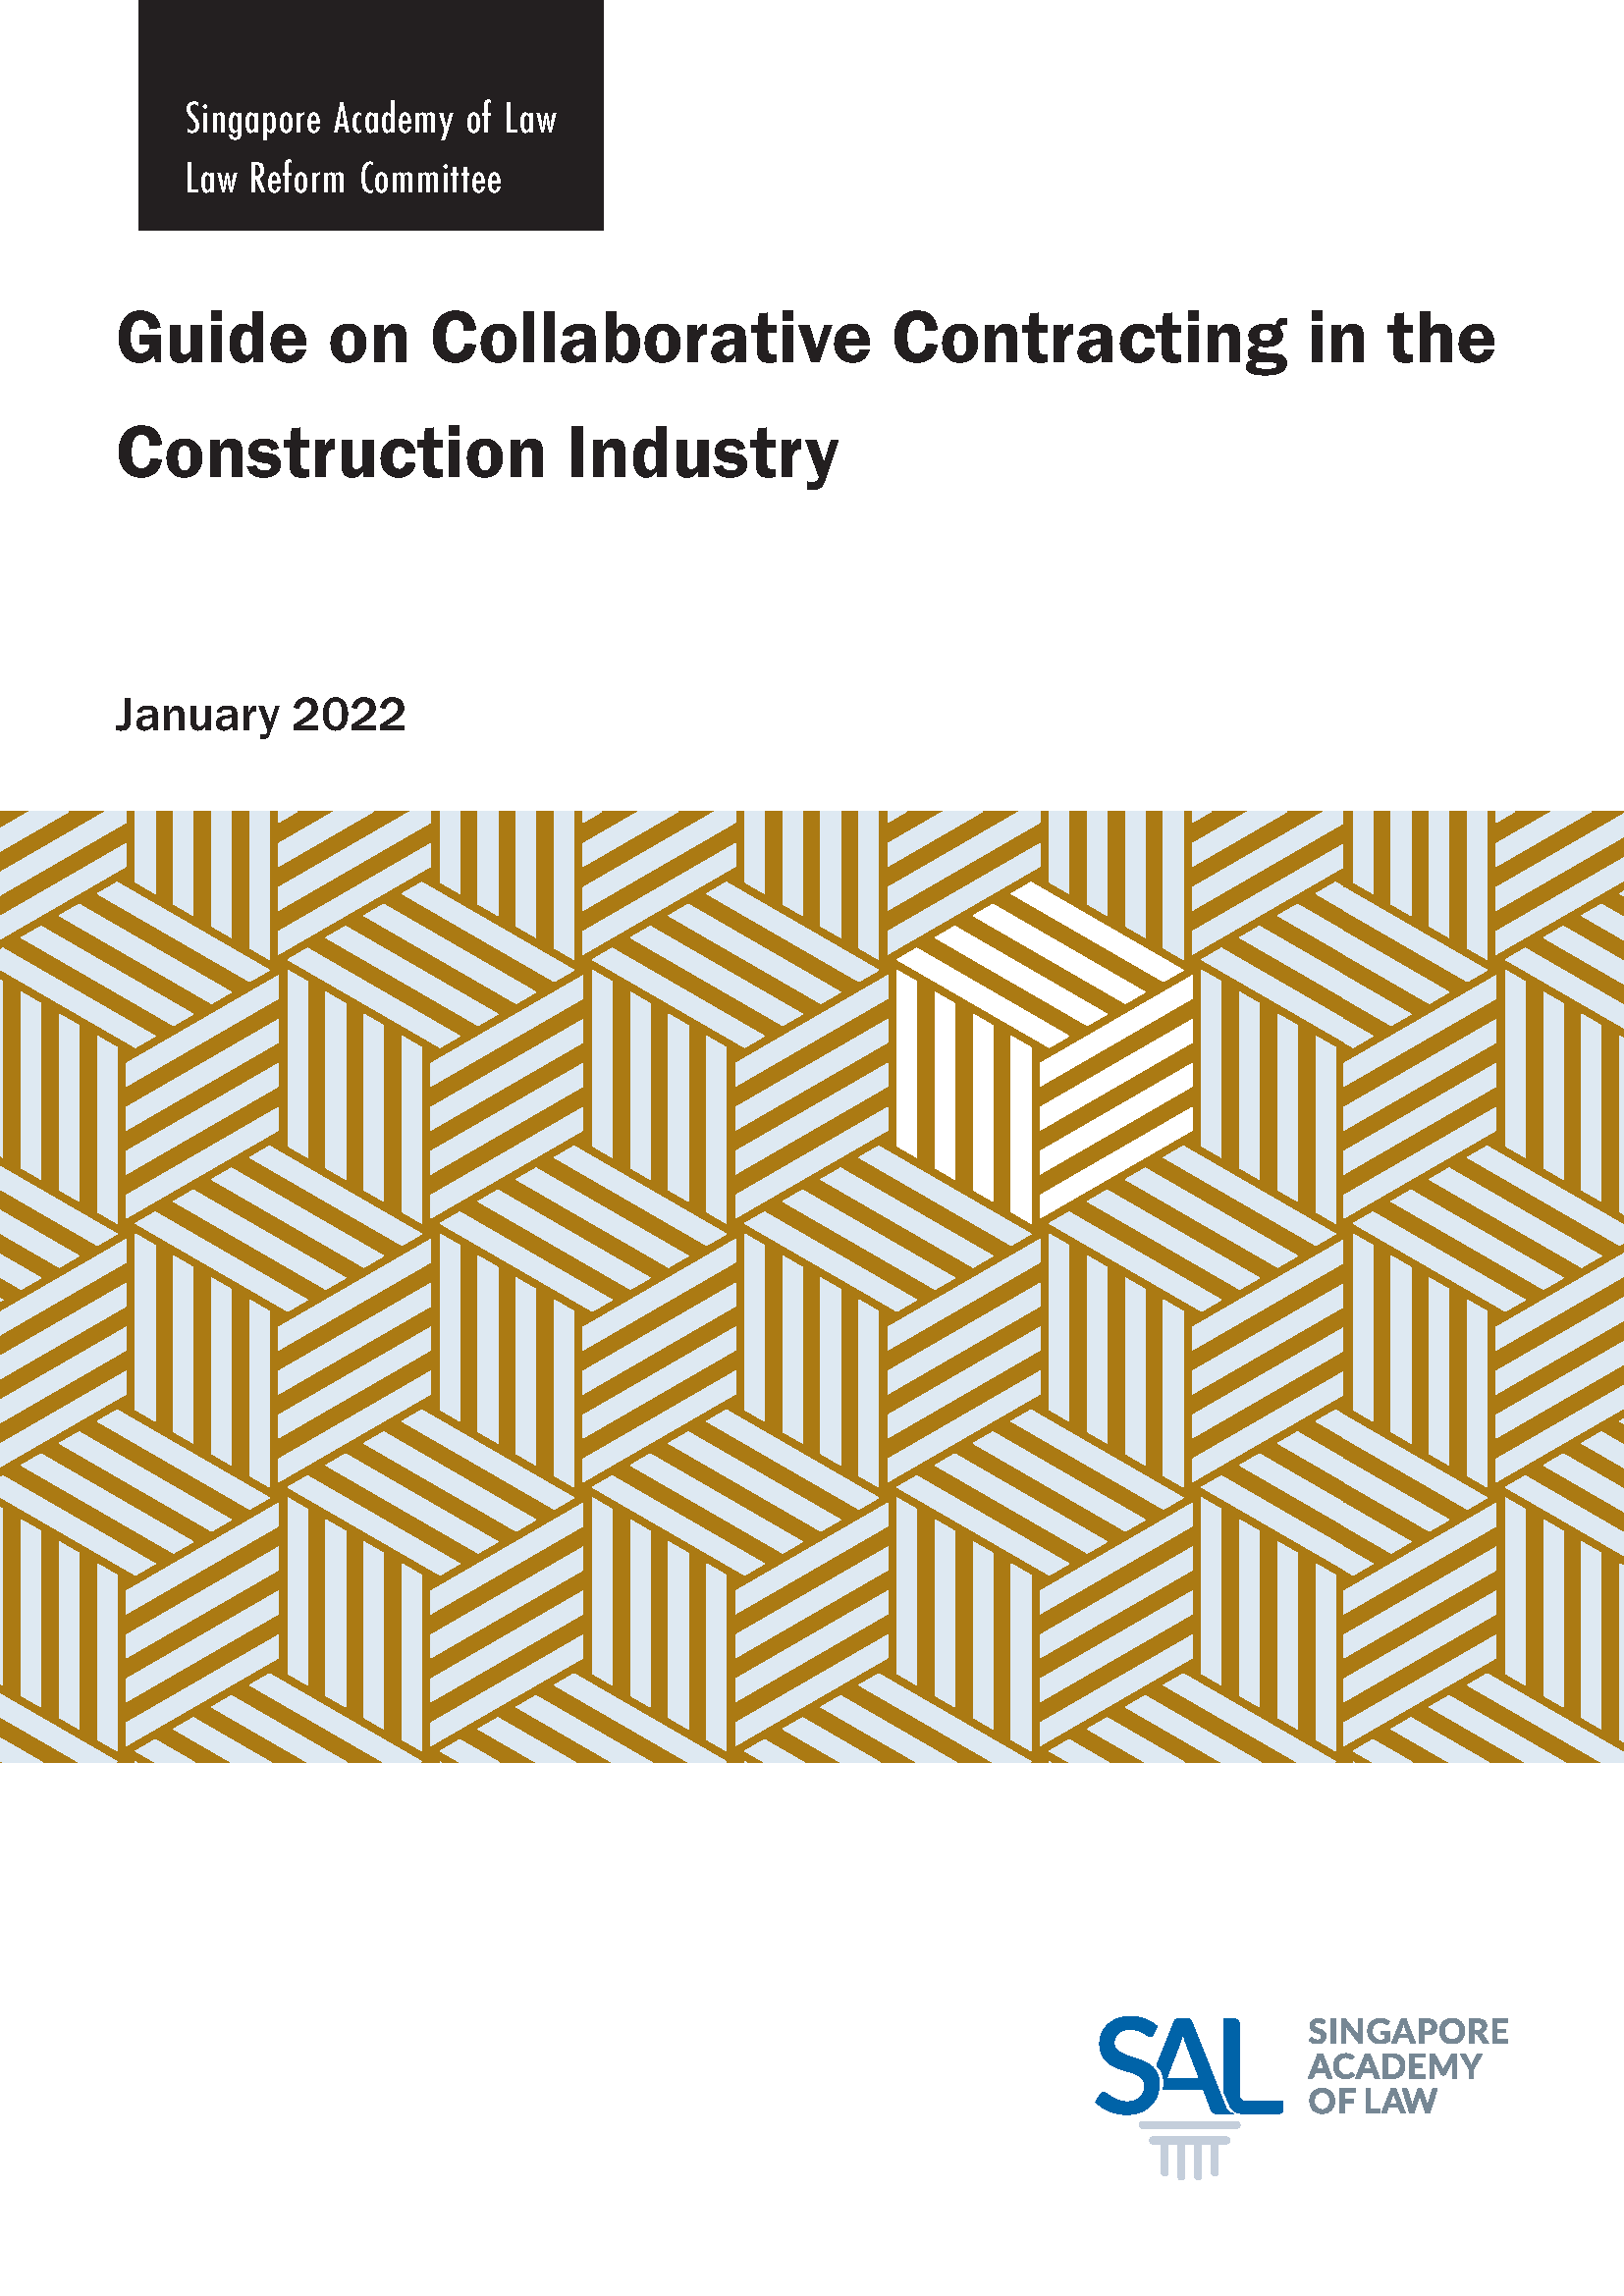 Guide on Collaborative Contracting in the Construction Industry_consolidated_Page_01